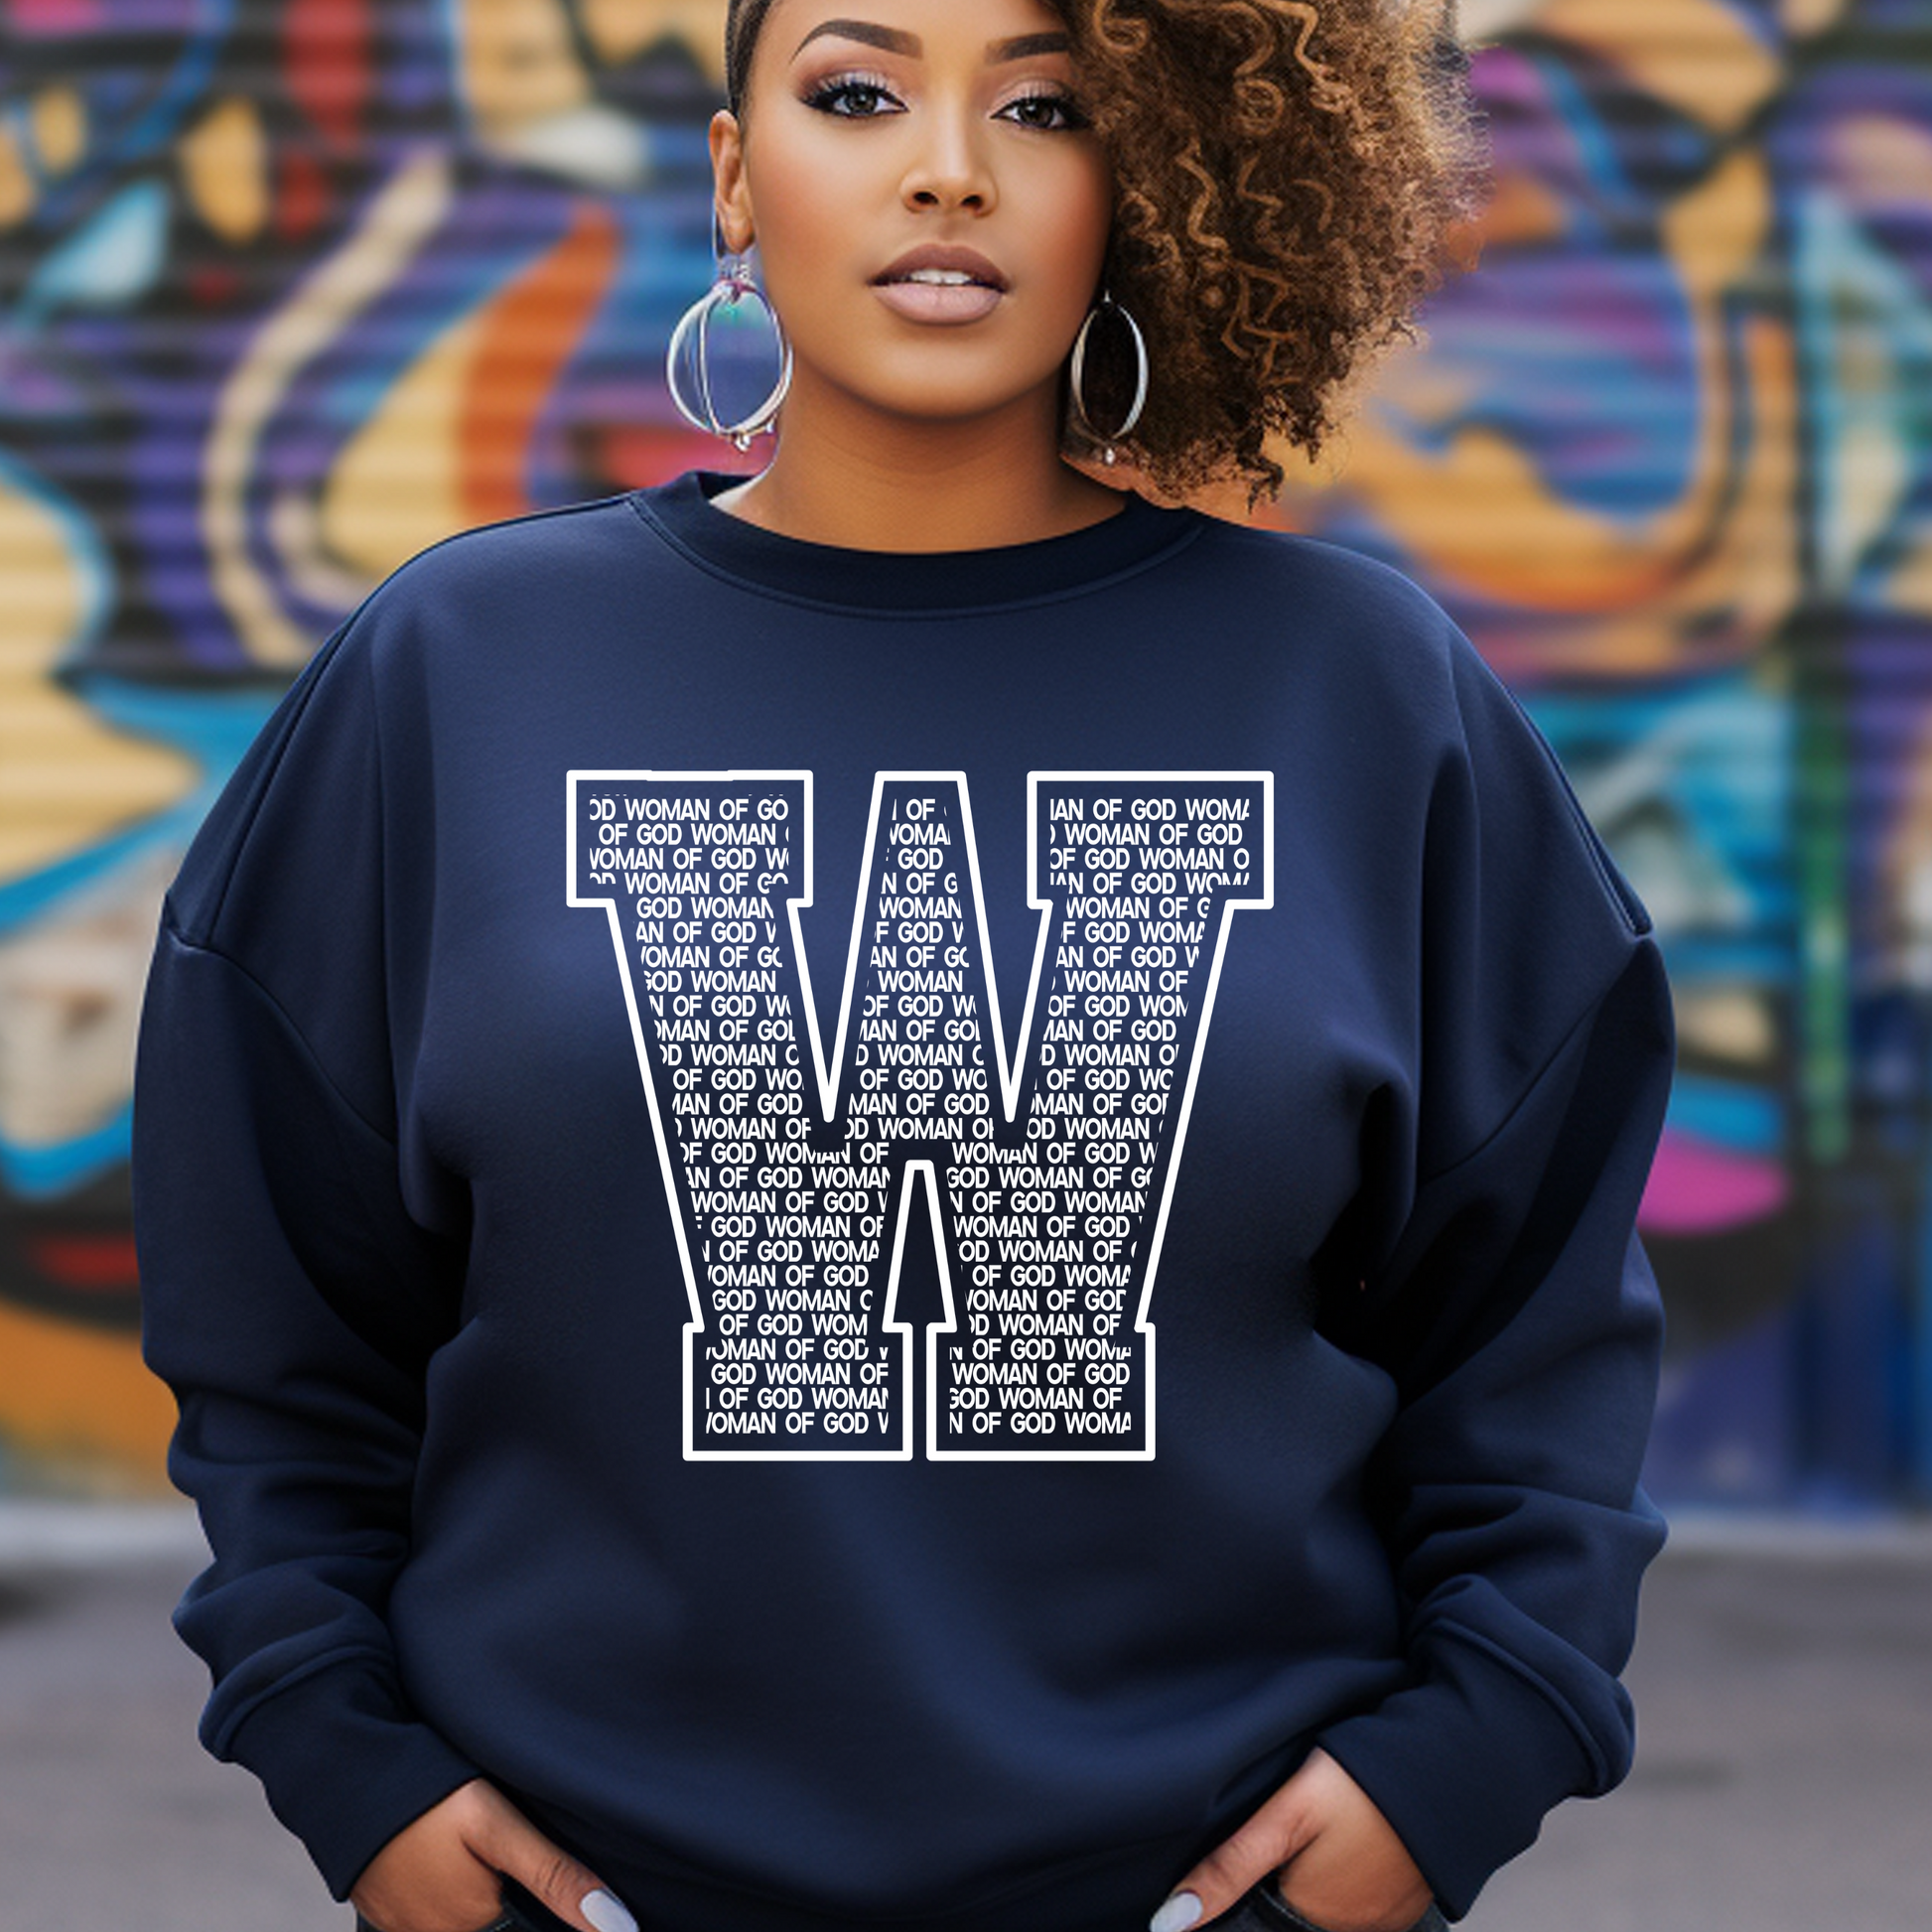 Shop for our Woman of God Navy blue Letterman Sweatshirt. This Christian clothing is soft, cozy, and great for everyday wear. Be proud of your faith and confidence in Jesus when you wear this Faith sweatshirt.